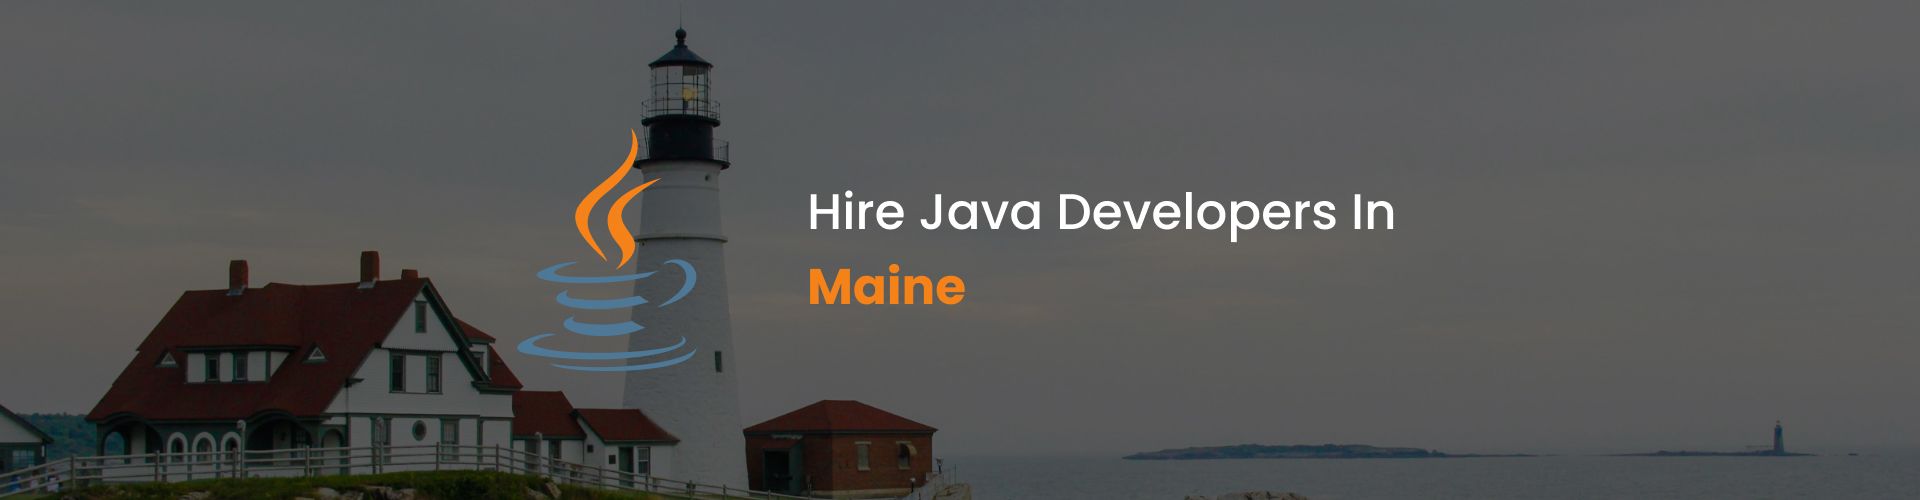 hire java developers in maine